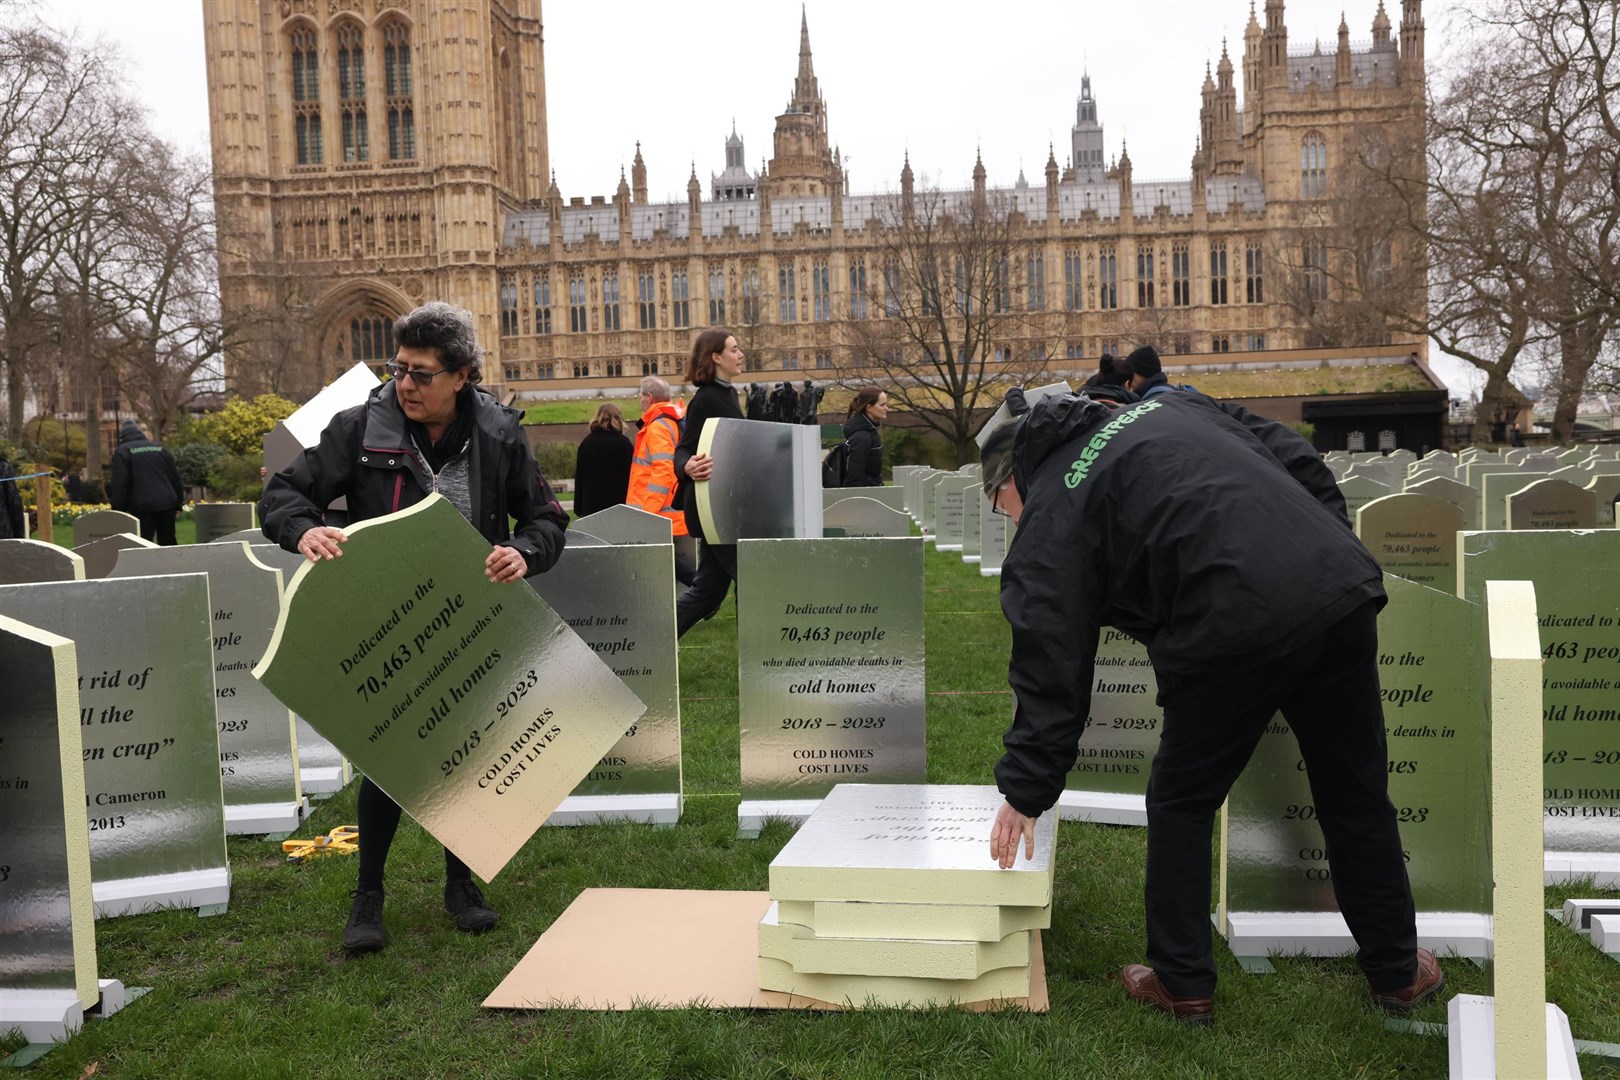 Protesters installing “headstones” made from insulation boards outside the Palace of Westminster in London (Alex McBride/Greenpeace/PA)